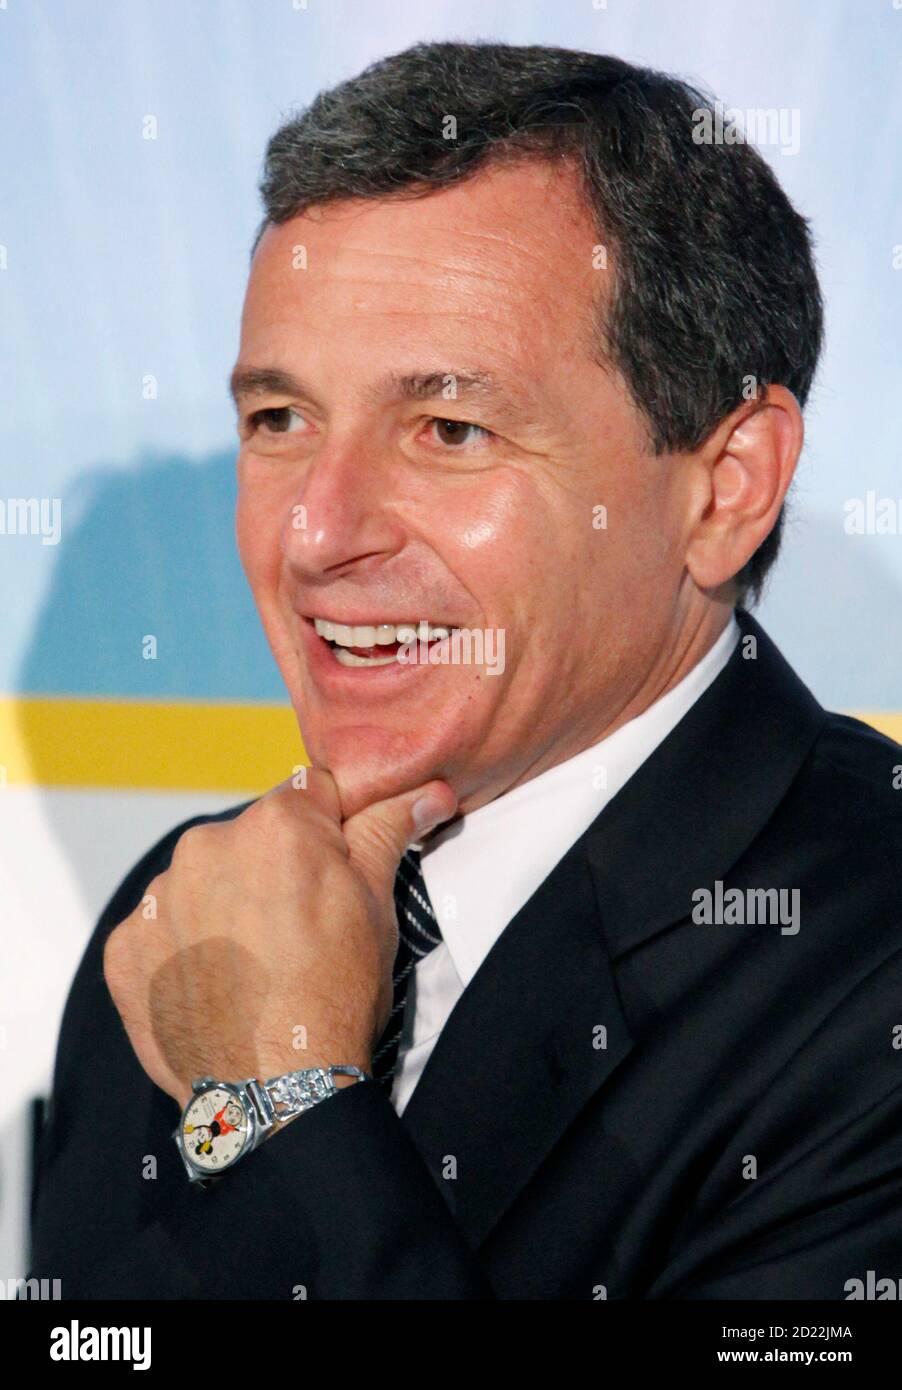 President and CEO of Walt Disney Co, Bob Iger, listens to a question as he  wears his 1933 Mickey Mouse Ingersoll Watch Company vintage watch during a  news conference at Disney's D23